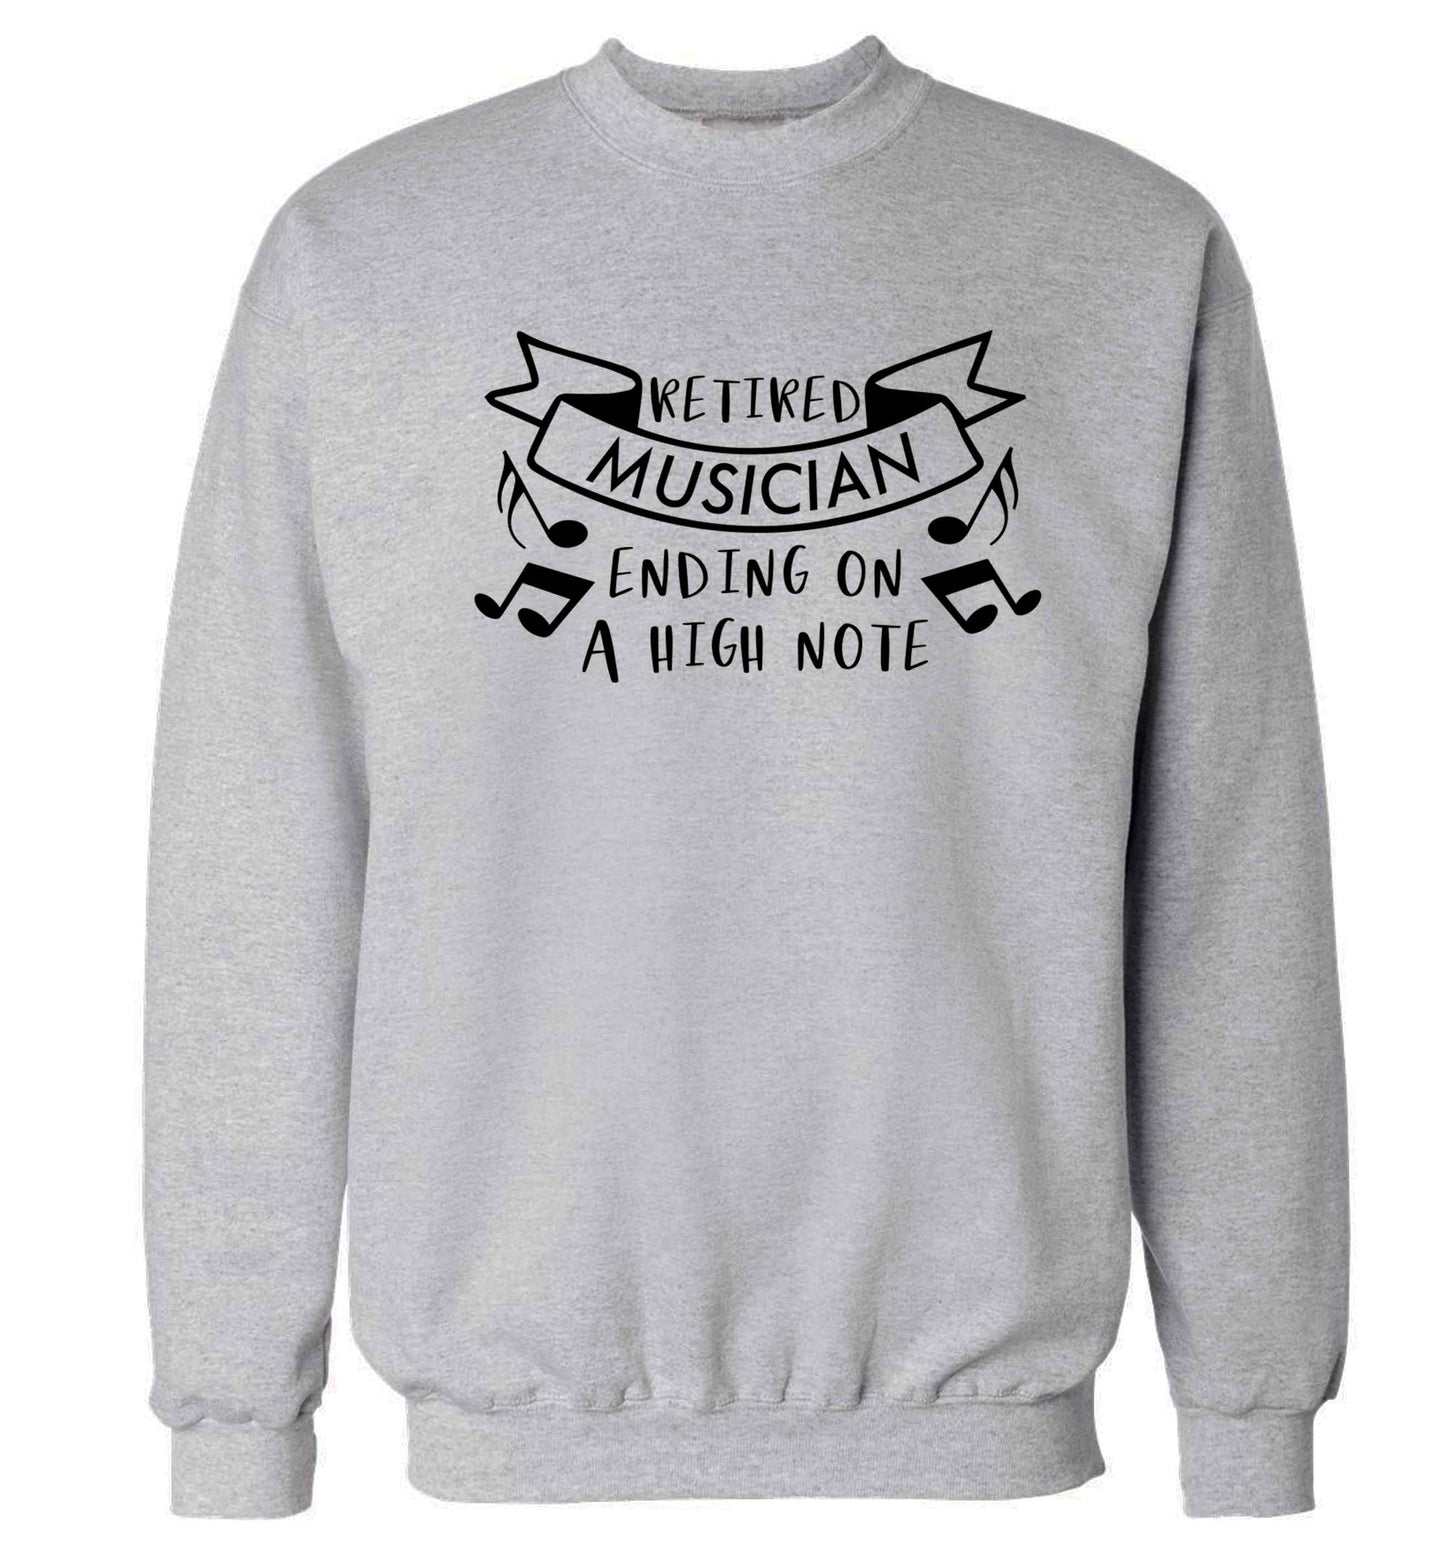 Retired musician ending on a high note Adult's unisex grey Sweater 2XL